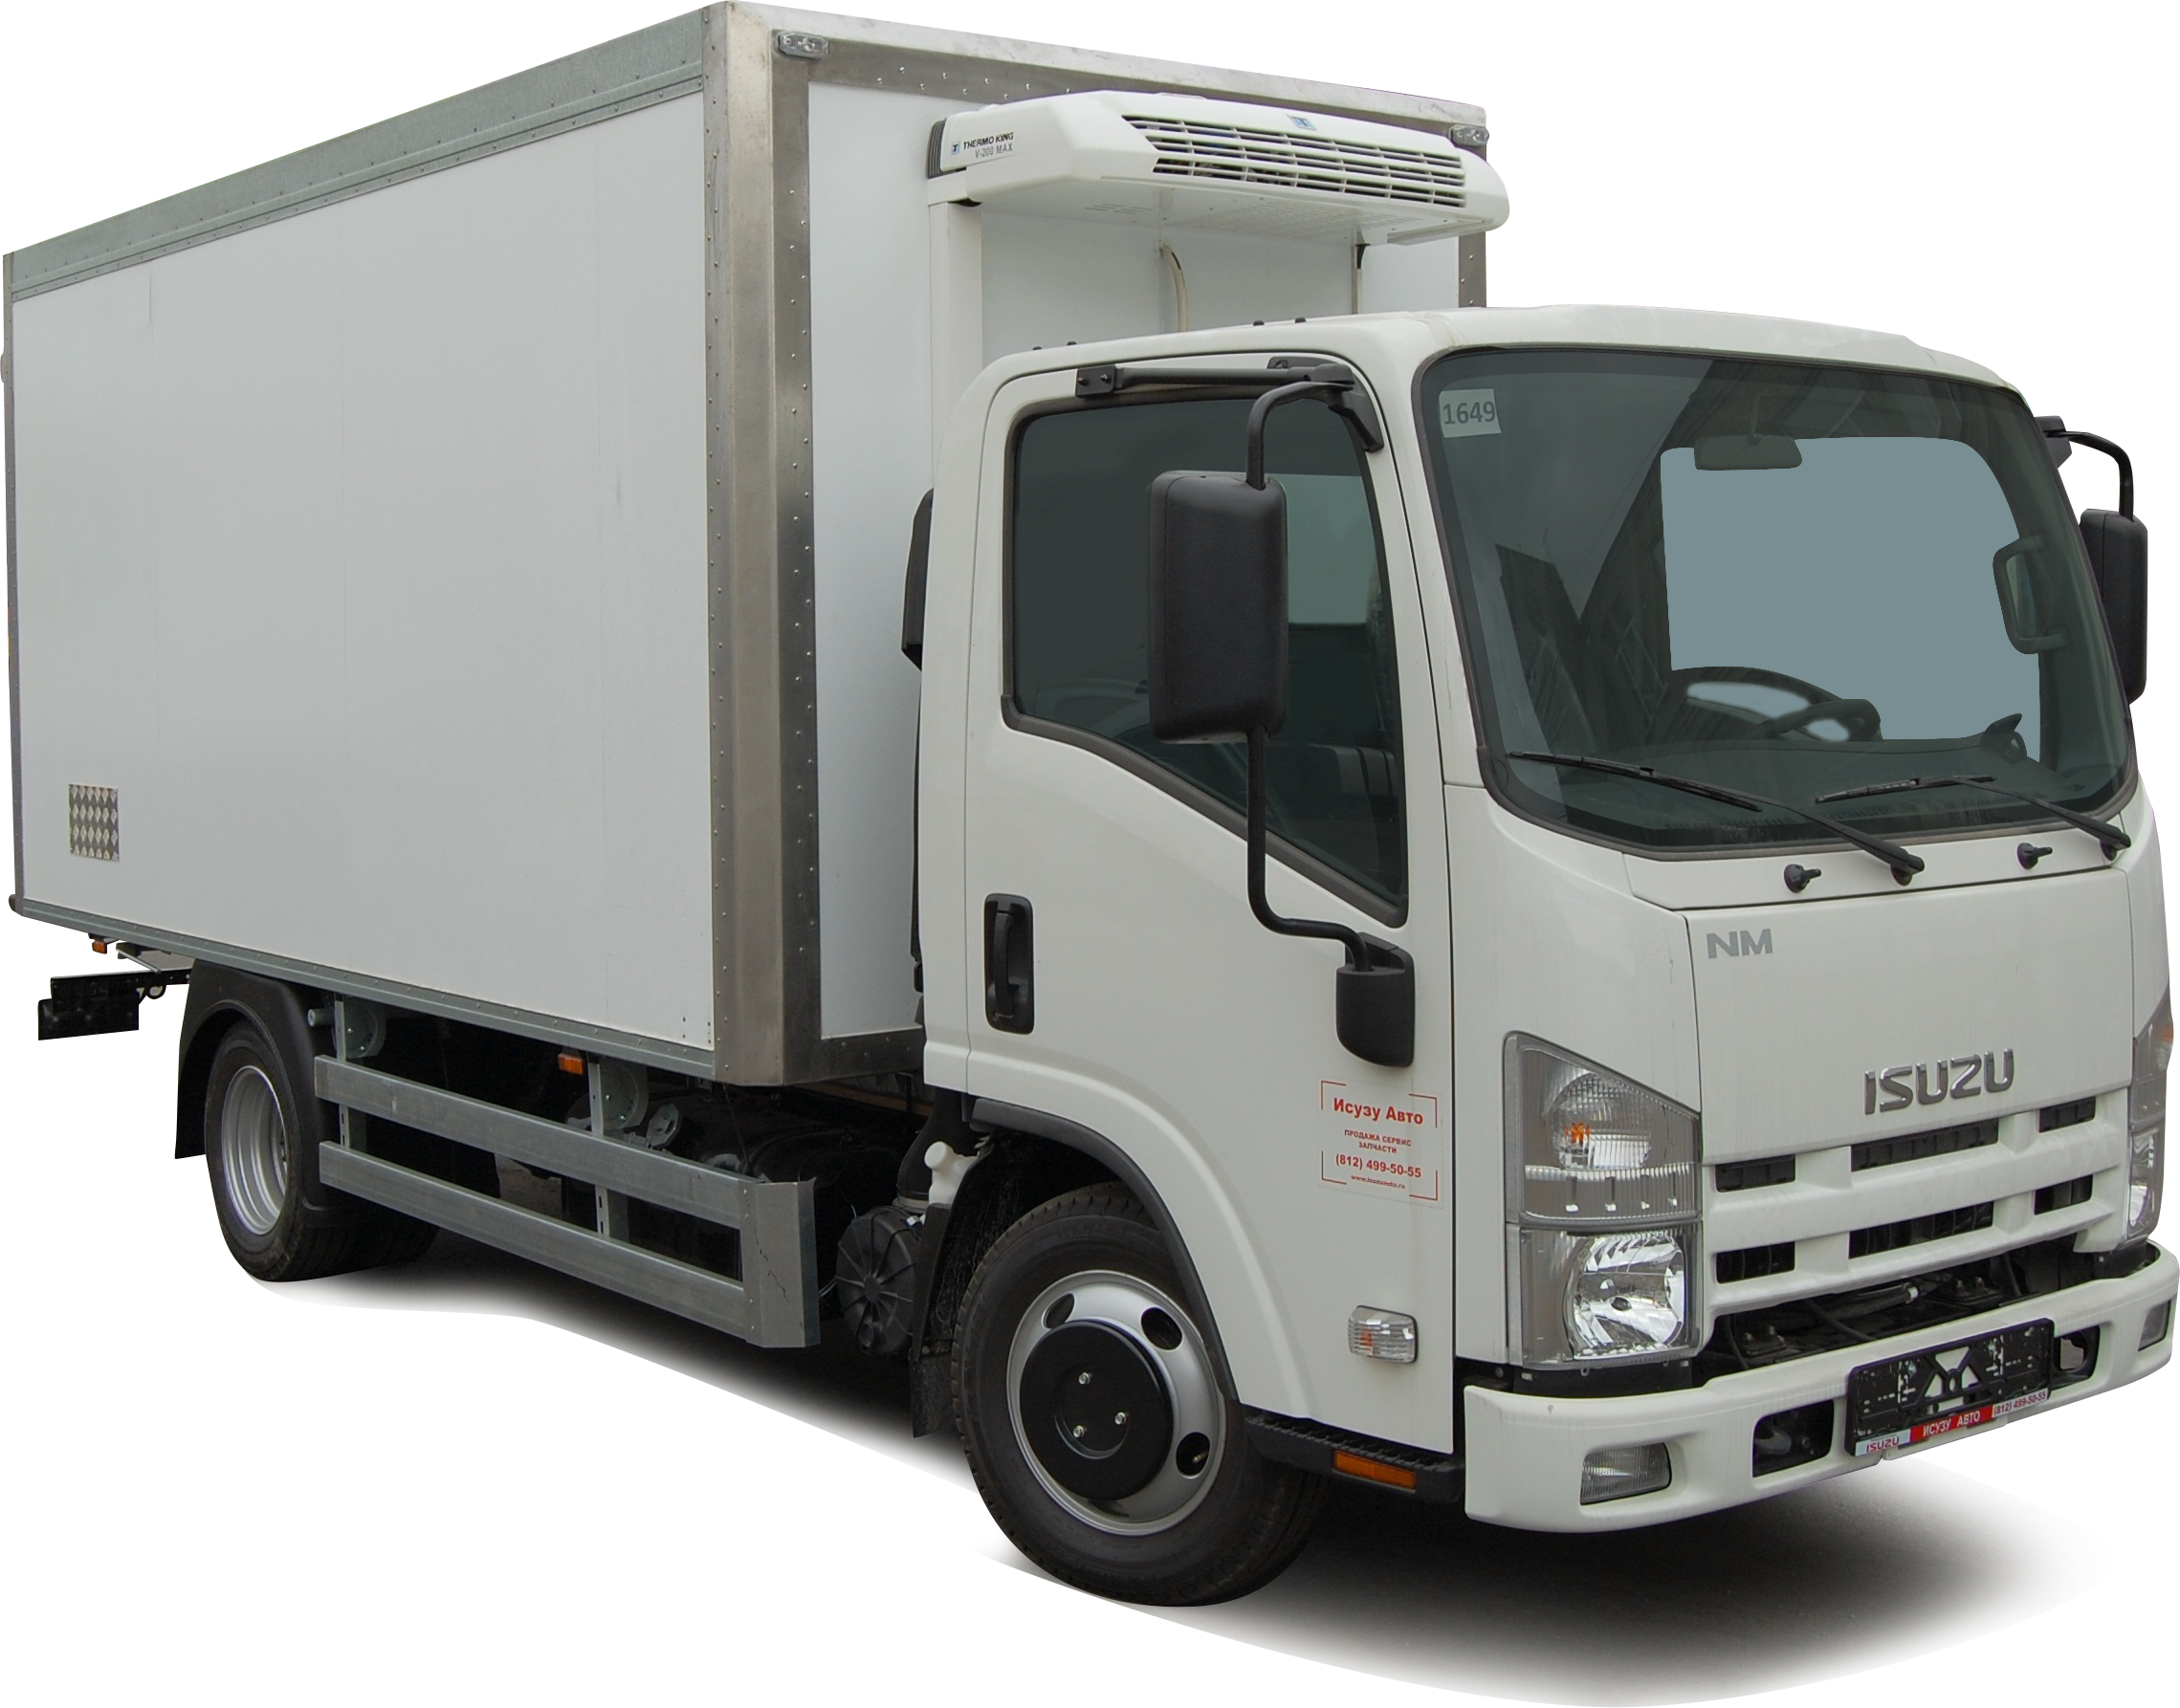 Free download. Truck png images